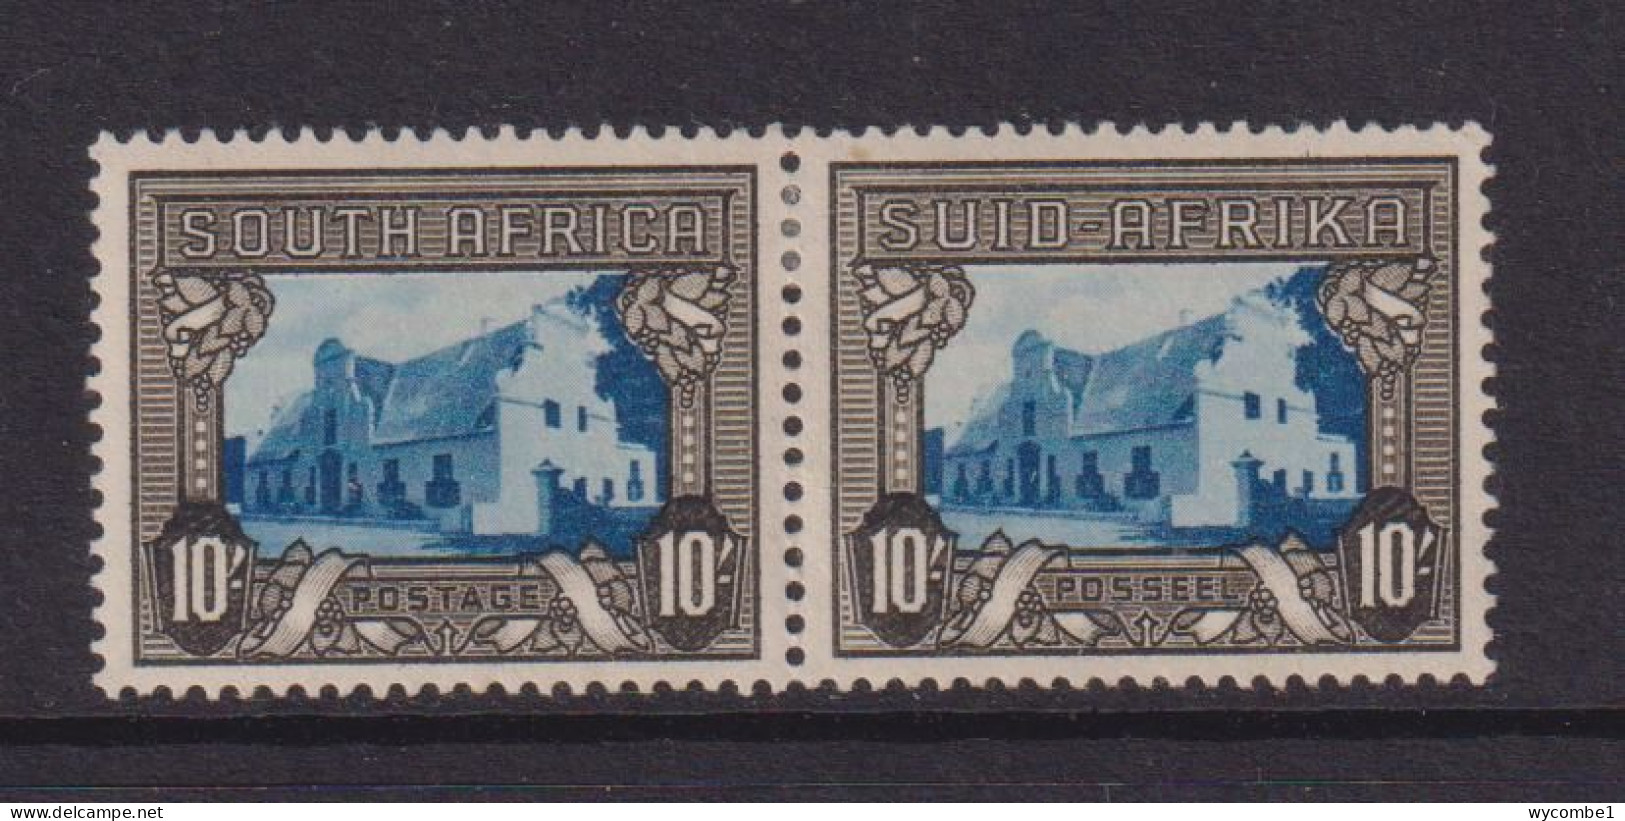 SOUTH AFRICA  - 1933-48 10s Bi-Lingual Pair Hinged Mint - Neufs